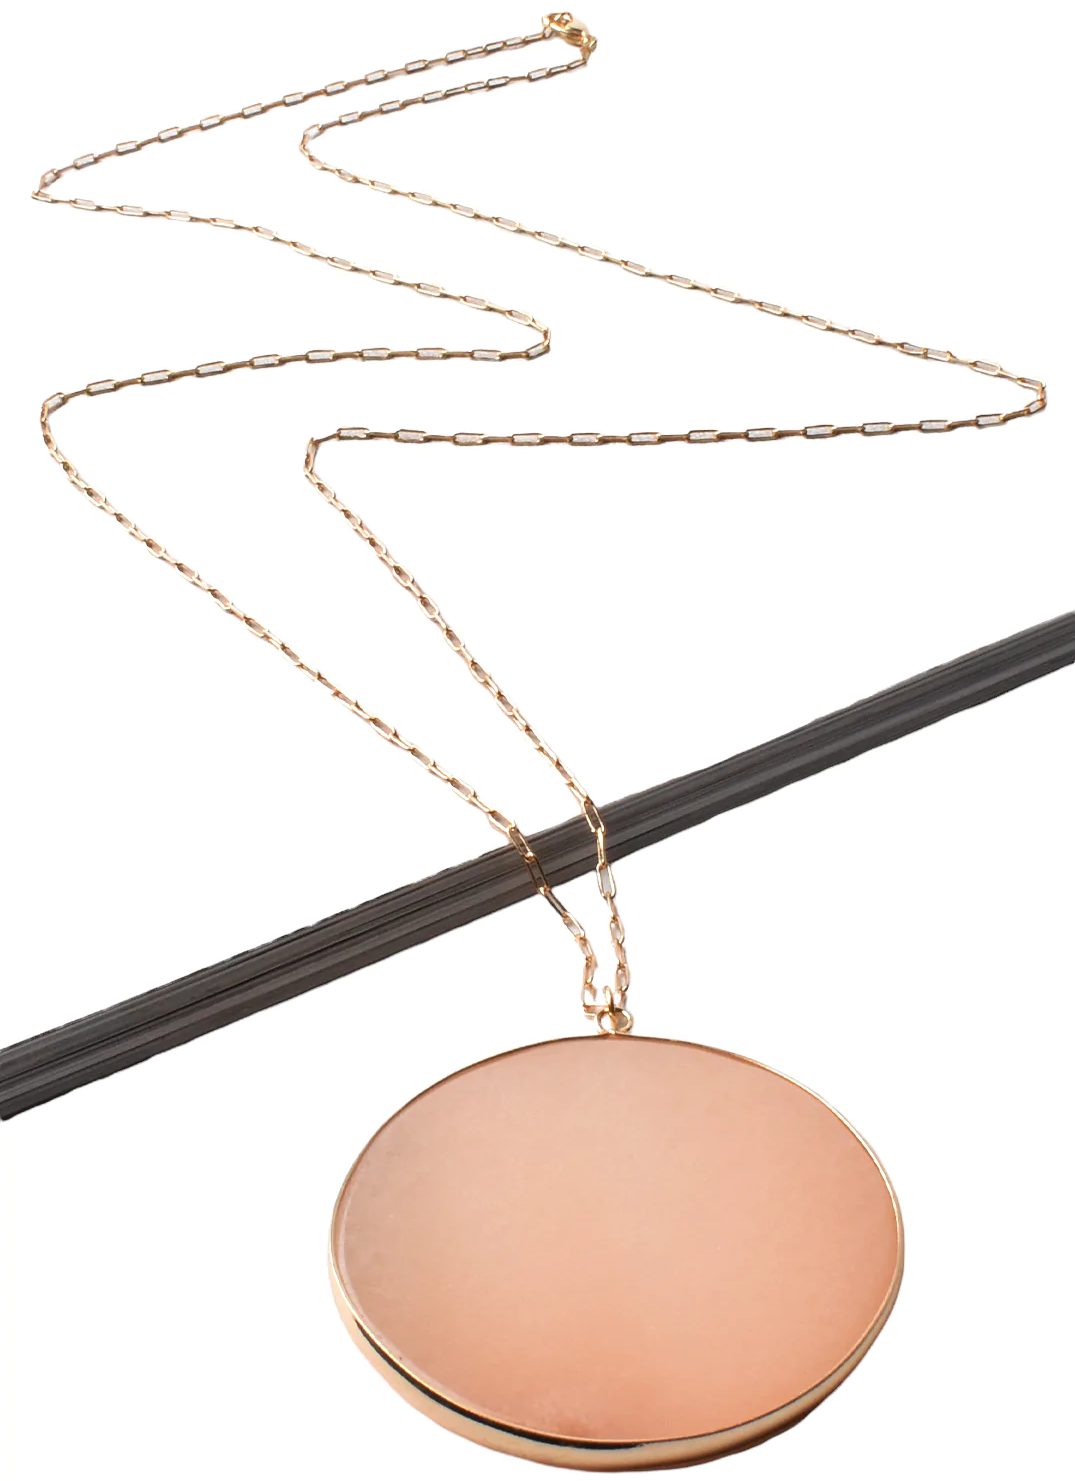 Fine Chain Round Disc Pendant Necklace in Pale Peach and Gold